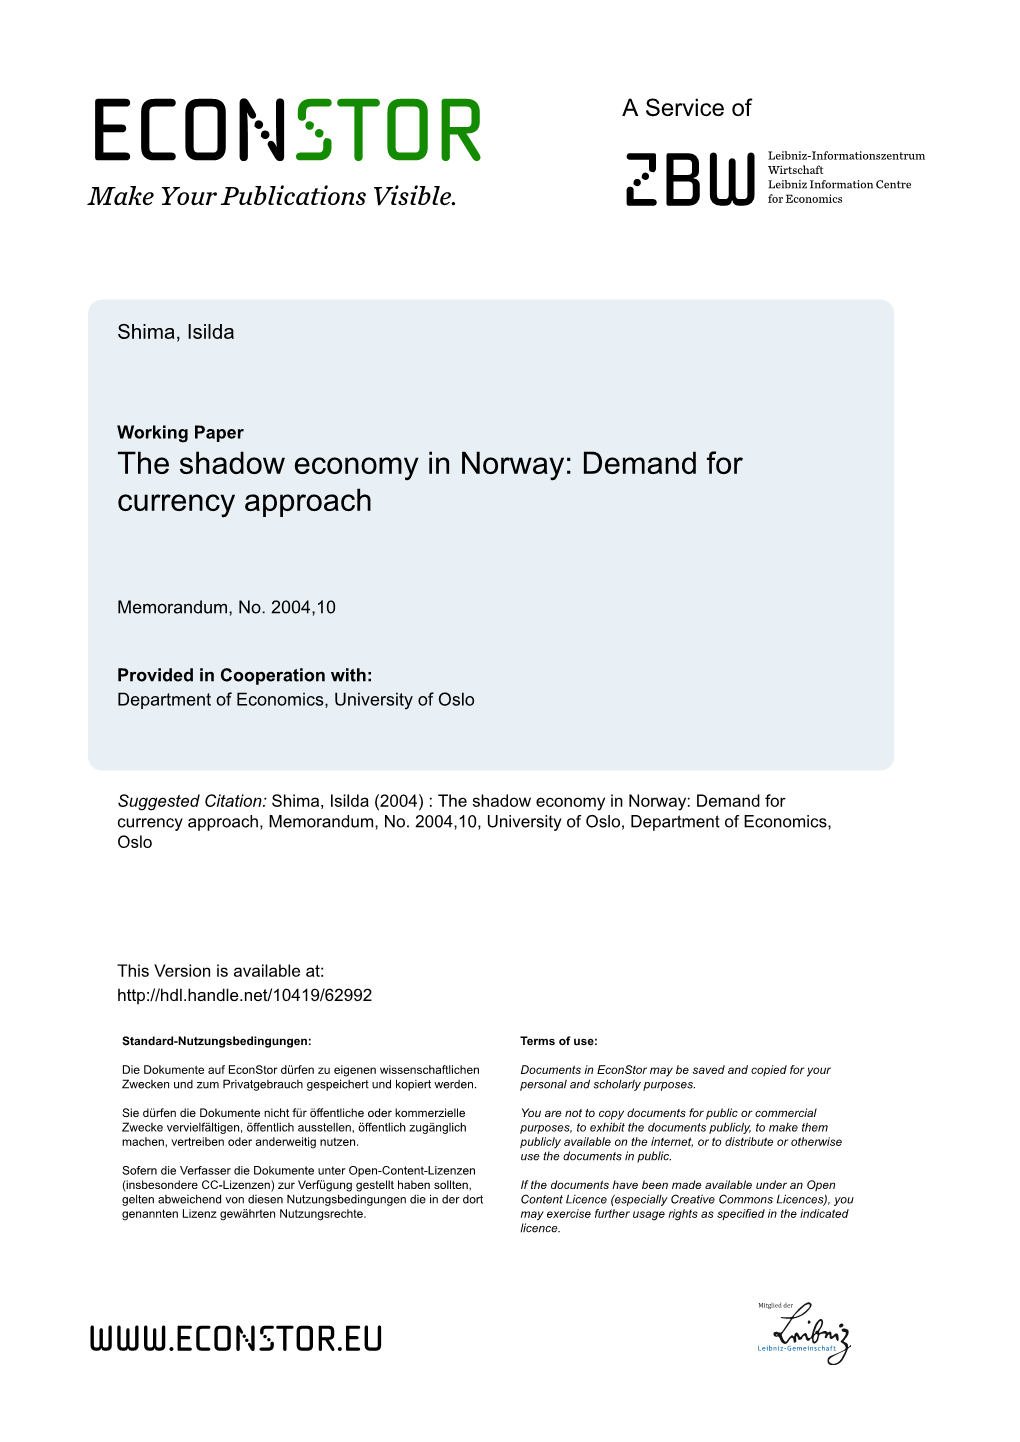 The Shadow Economy in Norway: Demand for Currency Approach